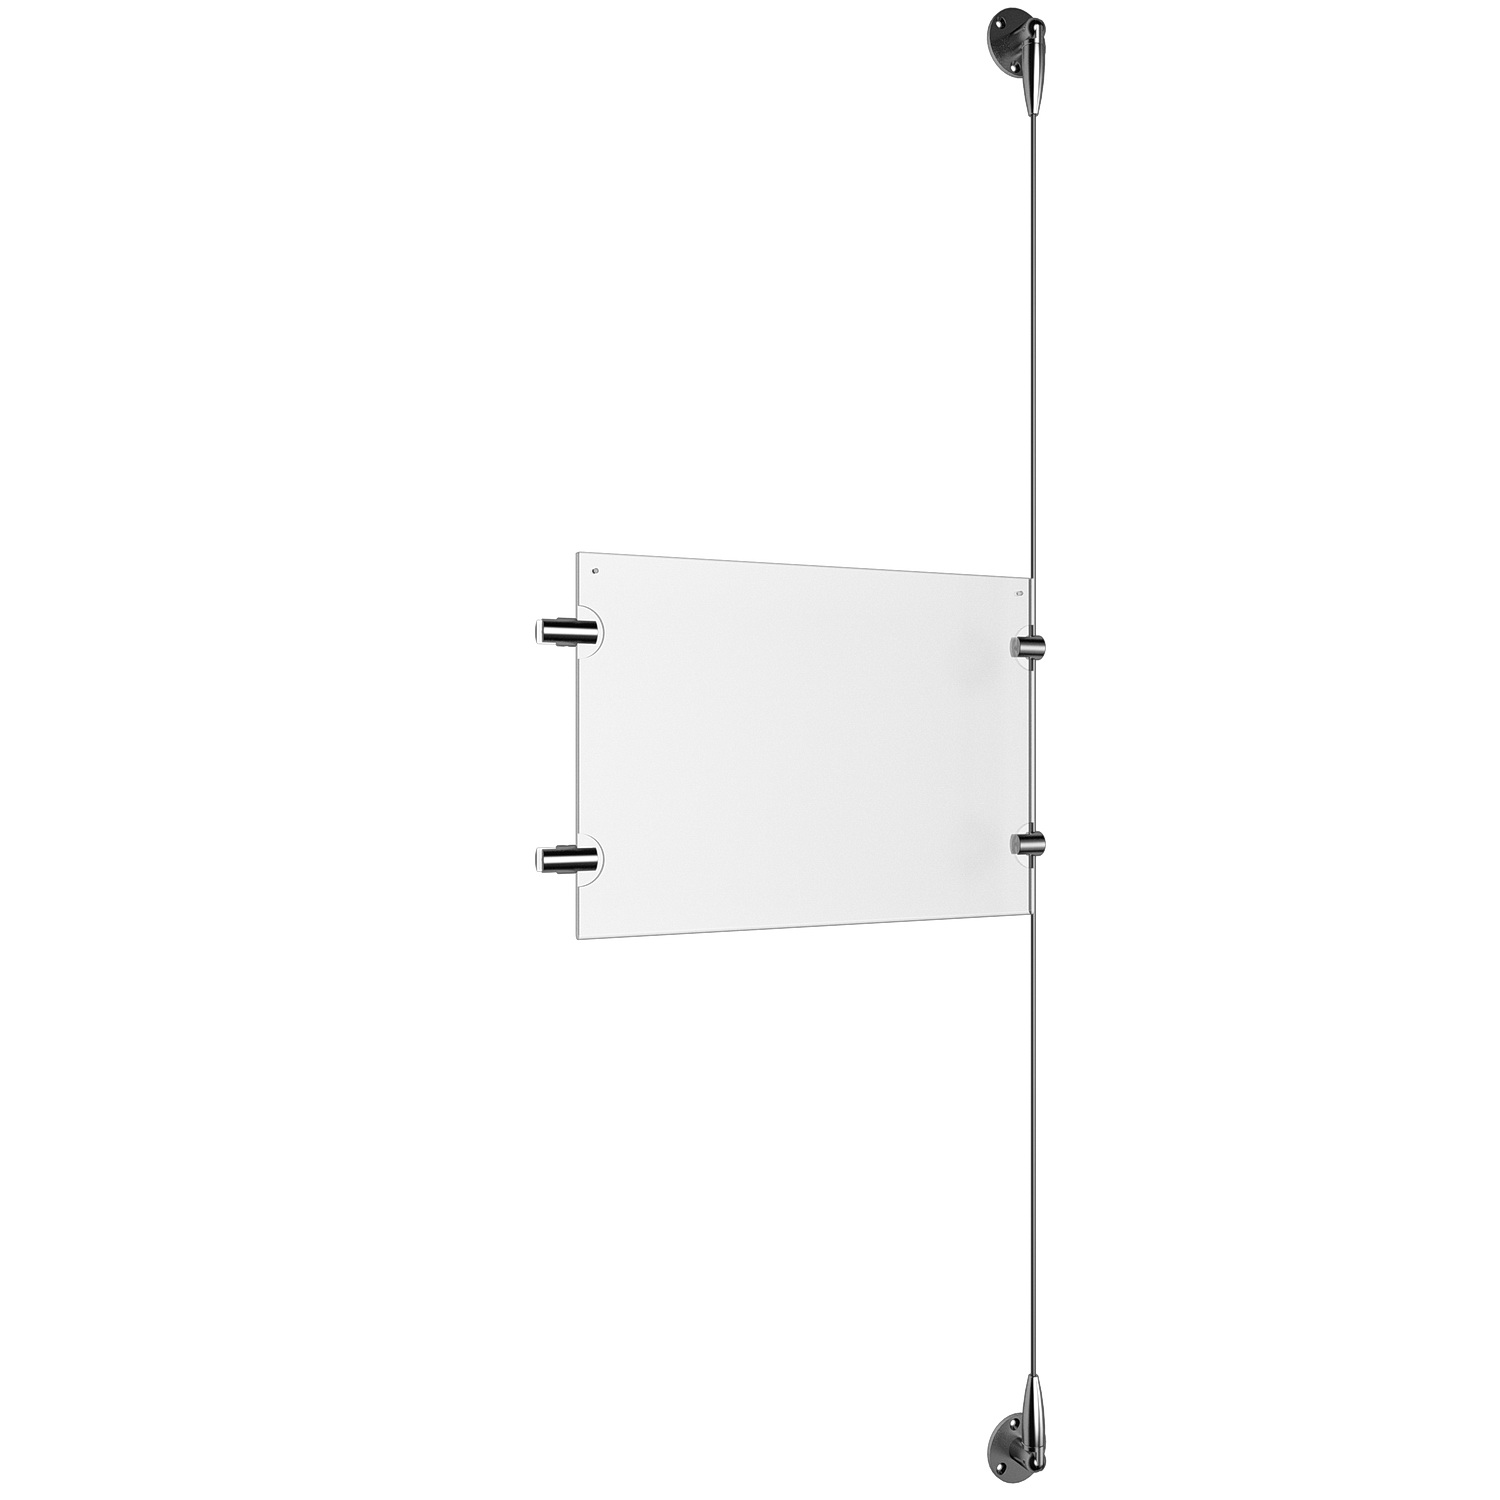 (1) 11'' Width x 8-1/2'' Height Clear Acrylic Frame & (1) Stainless Steel Satin Brushed Adjustable Angle Signature 1/8'' Cable Systems with (2) Single-Sided Panel Grippers (2) Double-Sided Panel Grippers